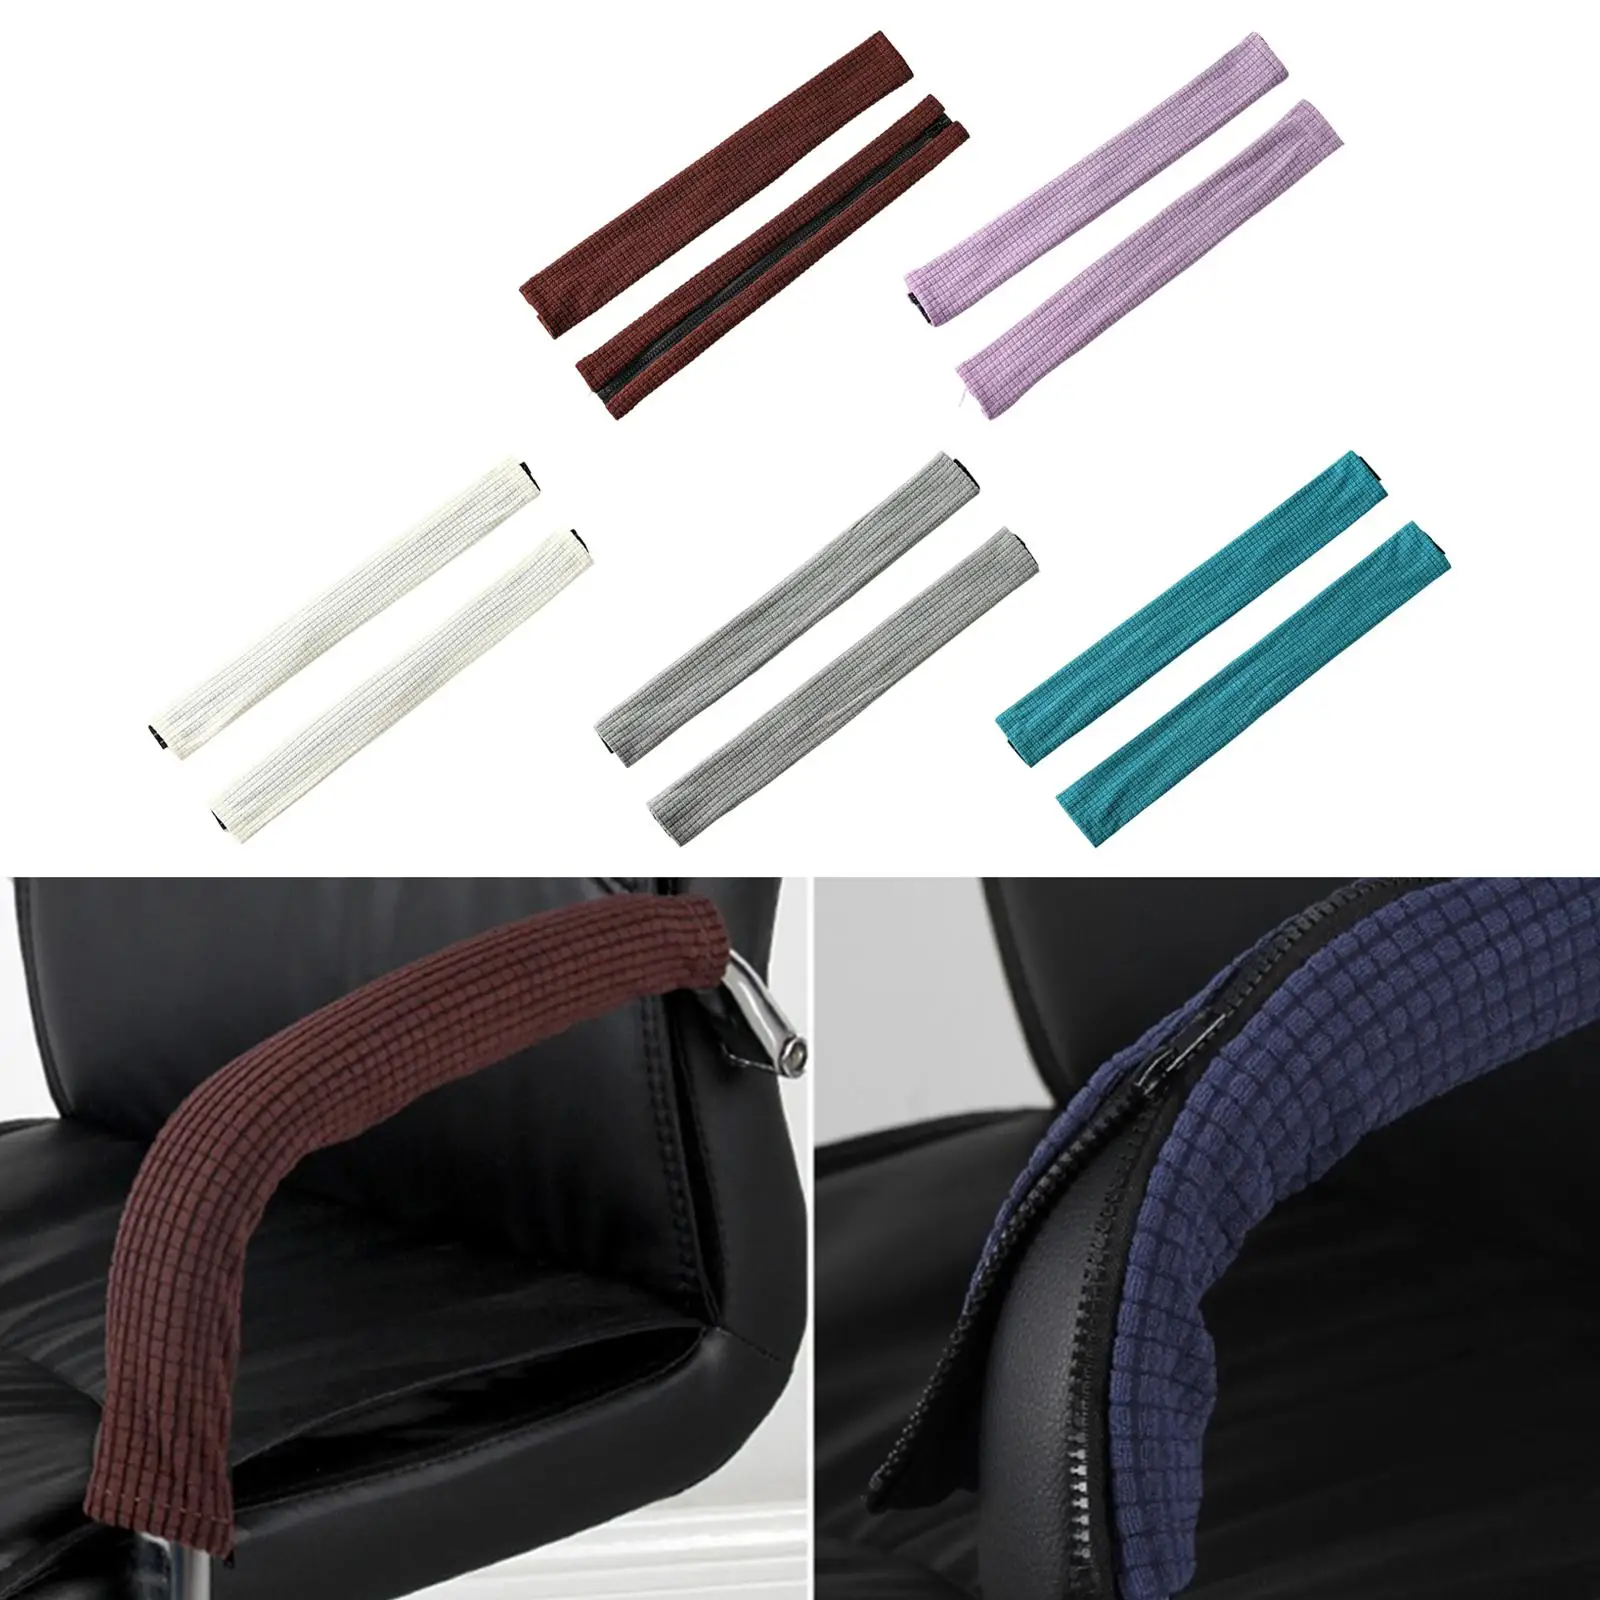 2 Pieces Chair Armrest Cover Slipcover Durable Protect Cover Removable Gaming Chair Arm Rest Pads for Office Gaming Chair Home